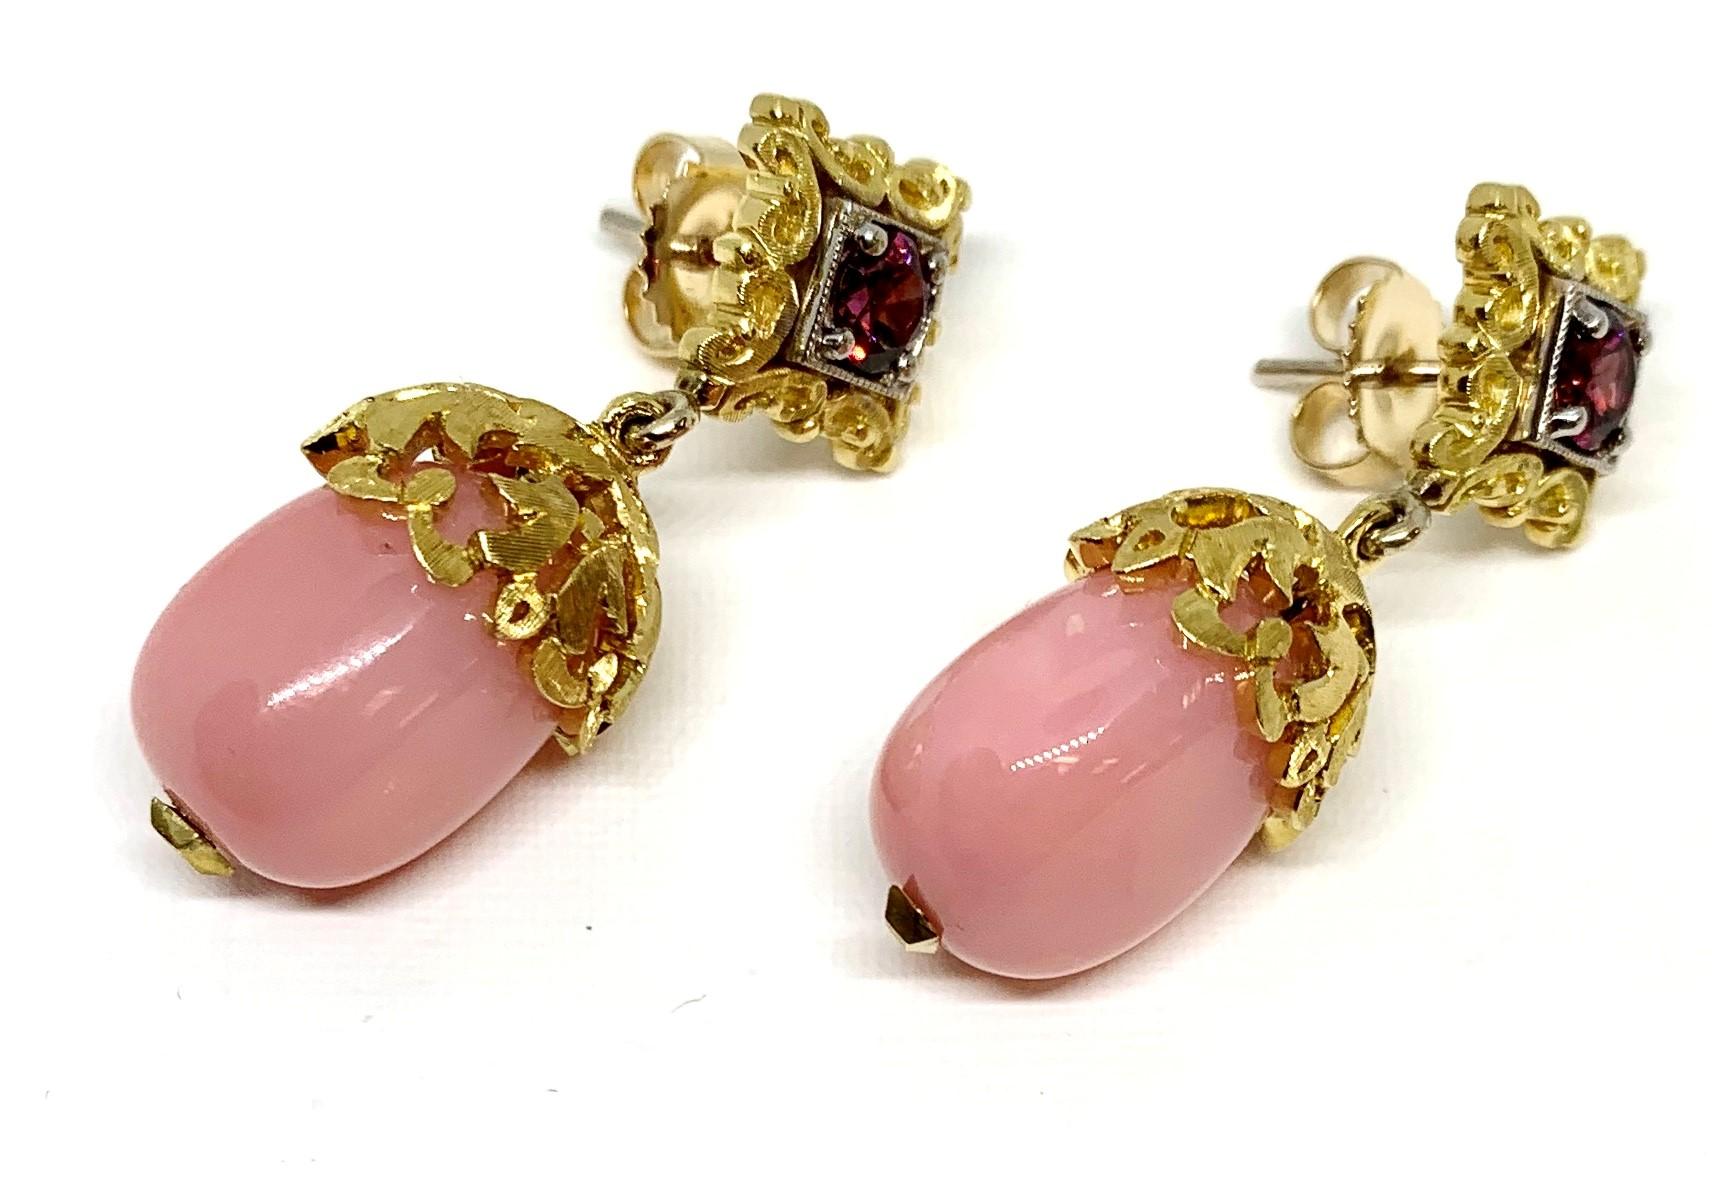 These beautifully handcrafted Peruvian opal and garnet drop earrings are sure to demand compliments whenever you wear them! Two strawberry-shake pink colored opals  (18.08 carats total weight) pair beautifully  with two raspberry color rhodolite